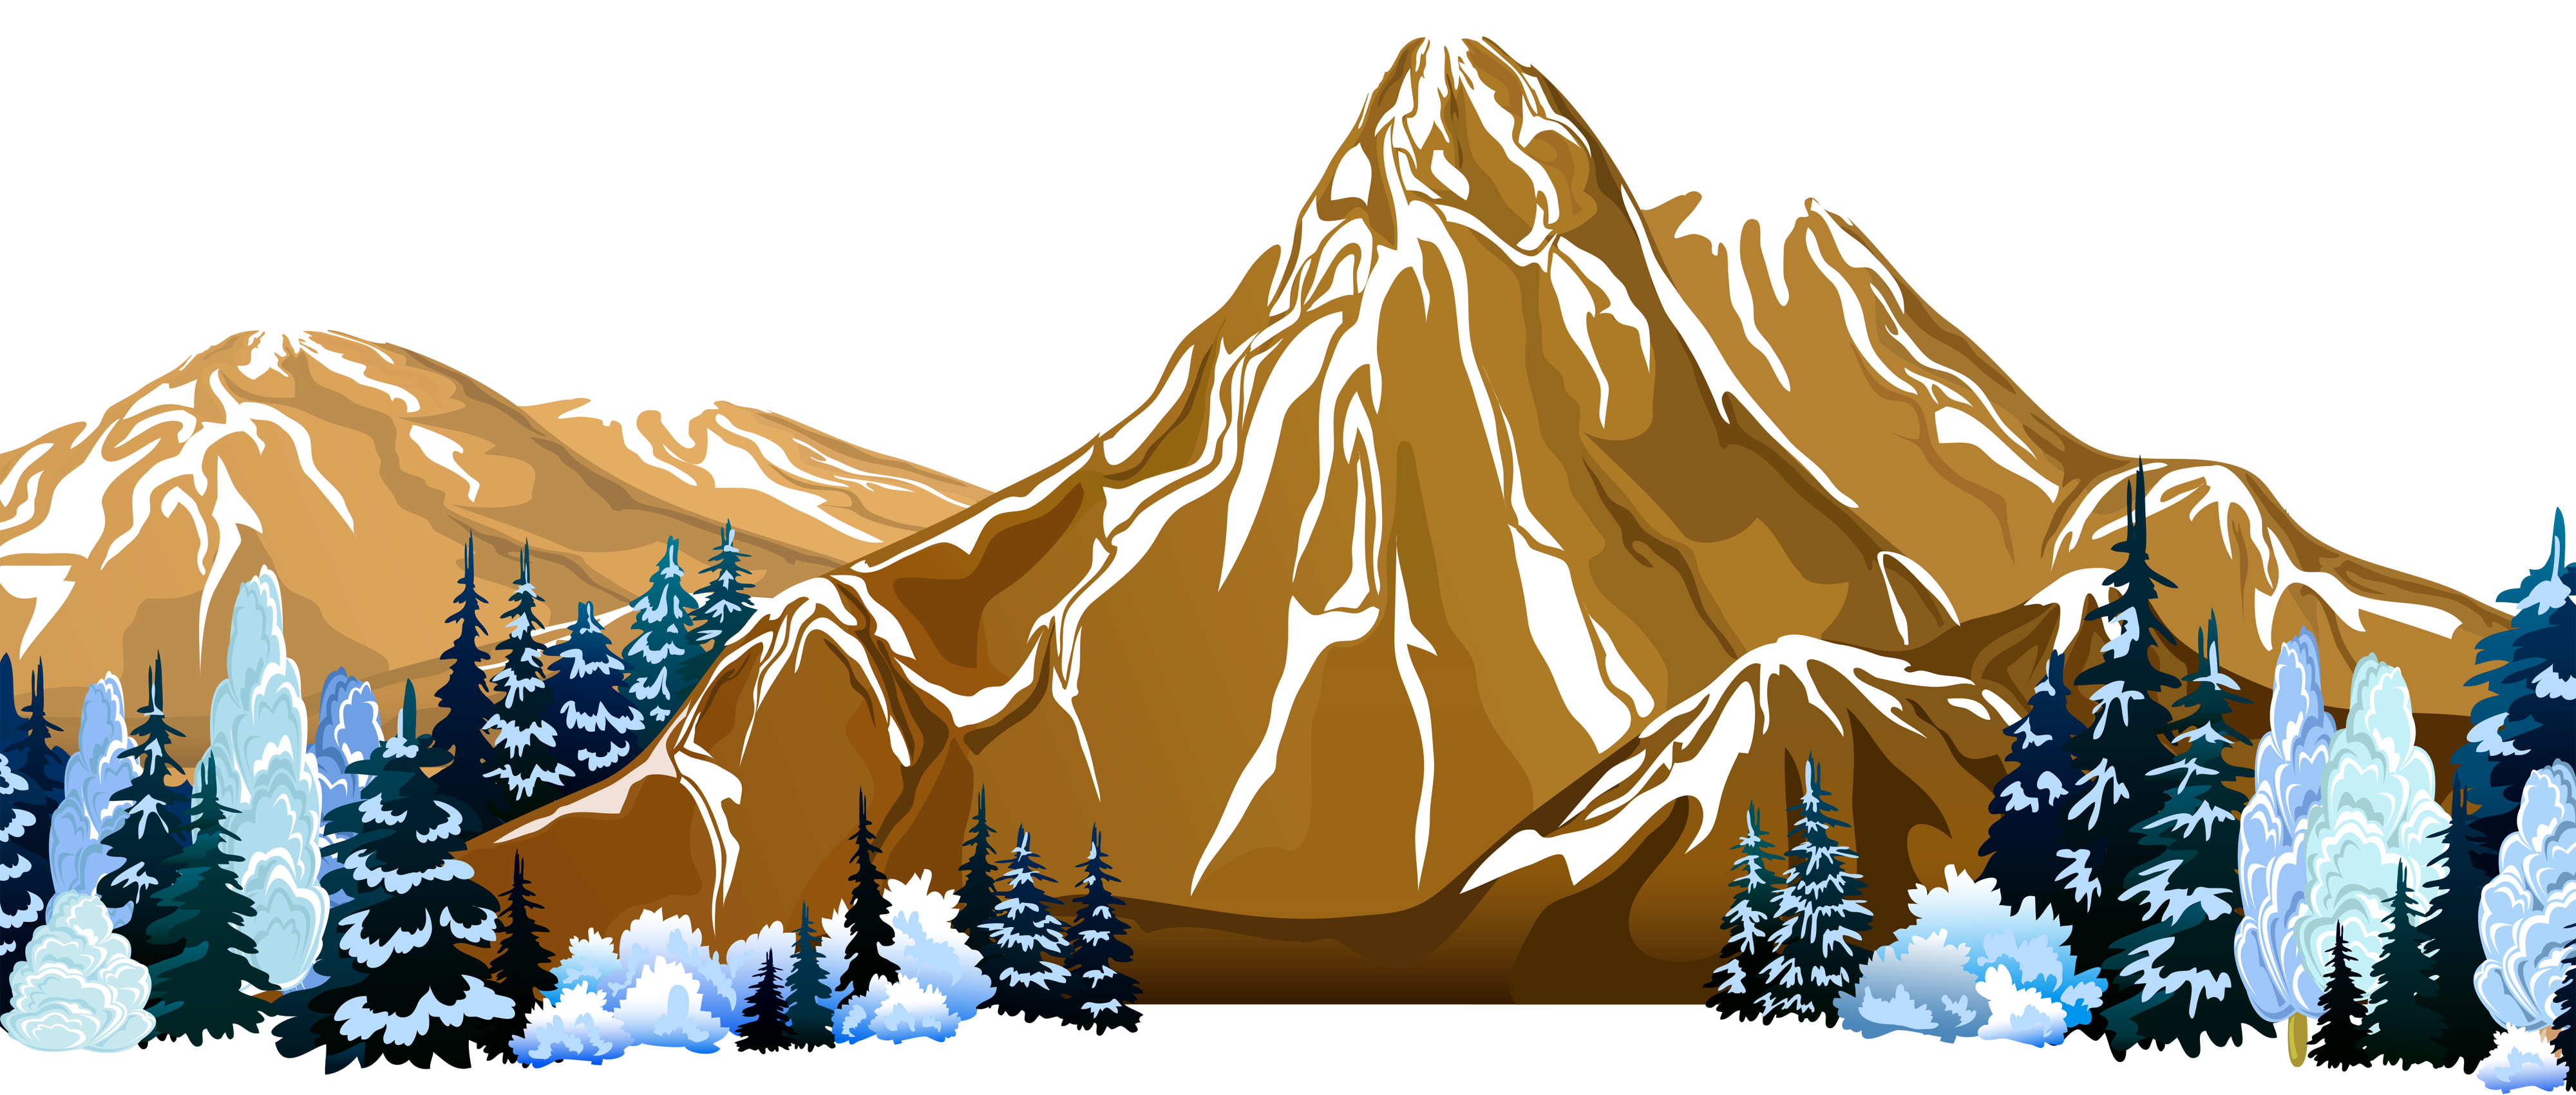 Transparent Mountains Clipart Png Transparent Mountain Drawing Png Images